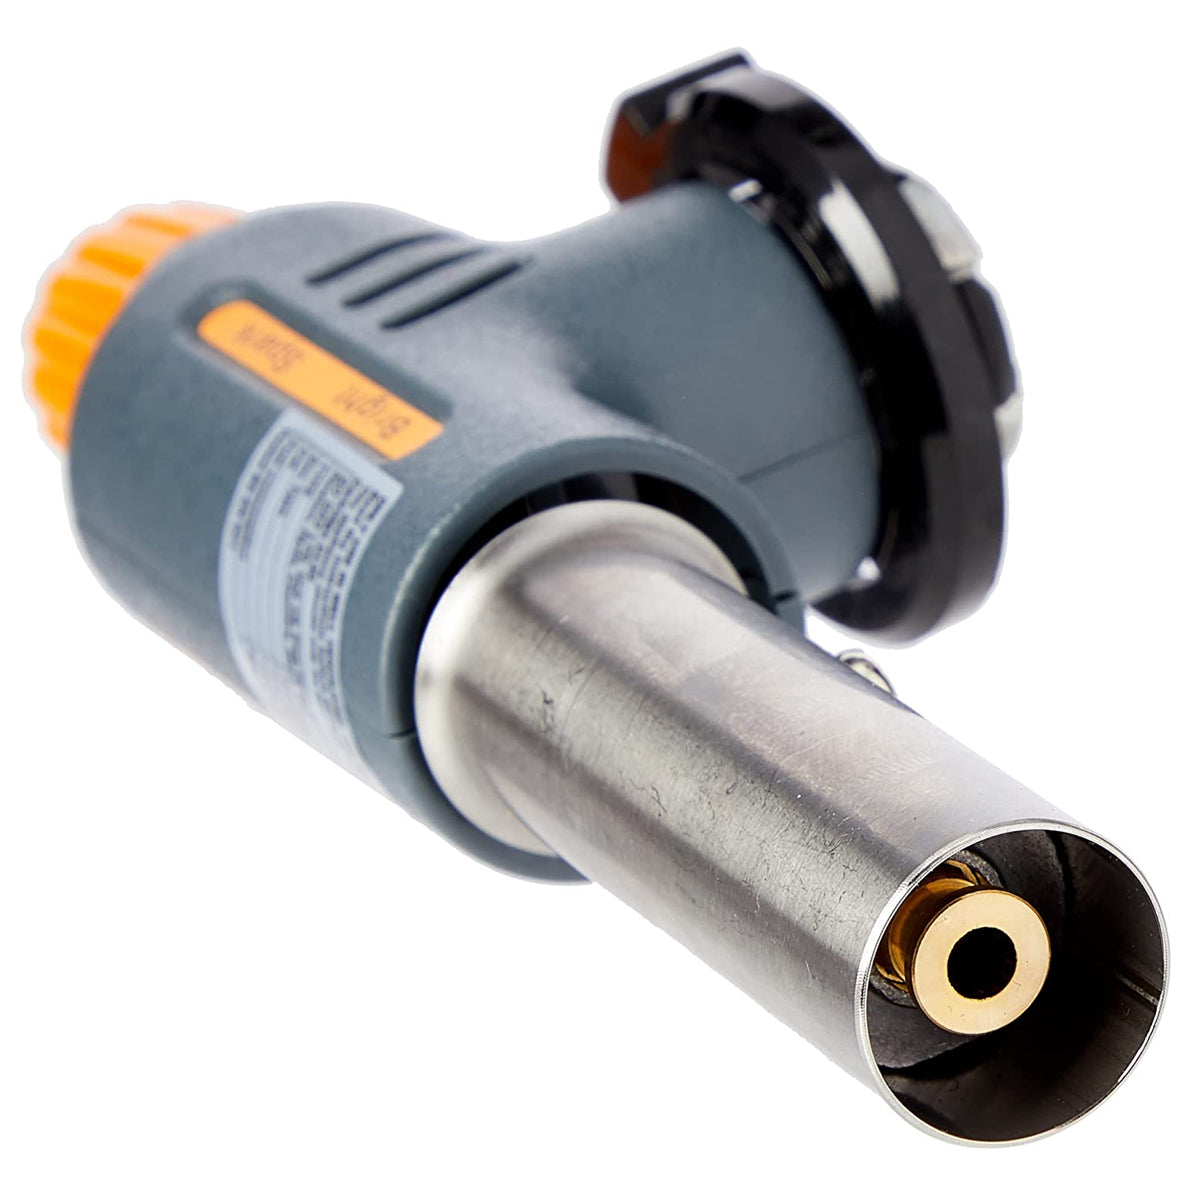 Bright Spark Catering Blowtorch